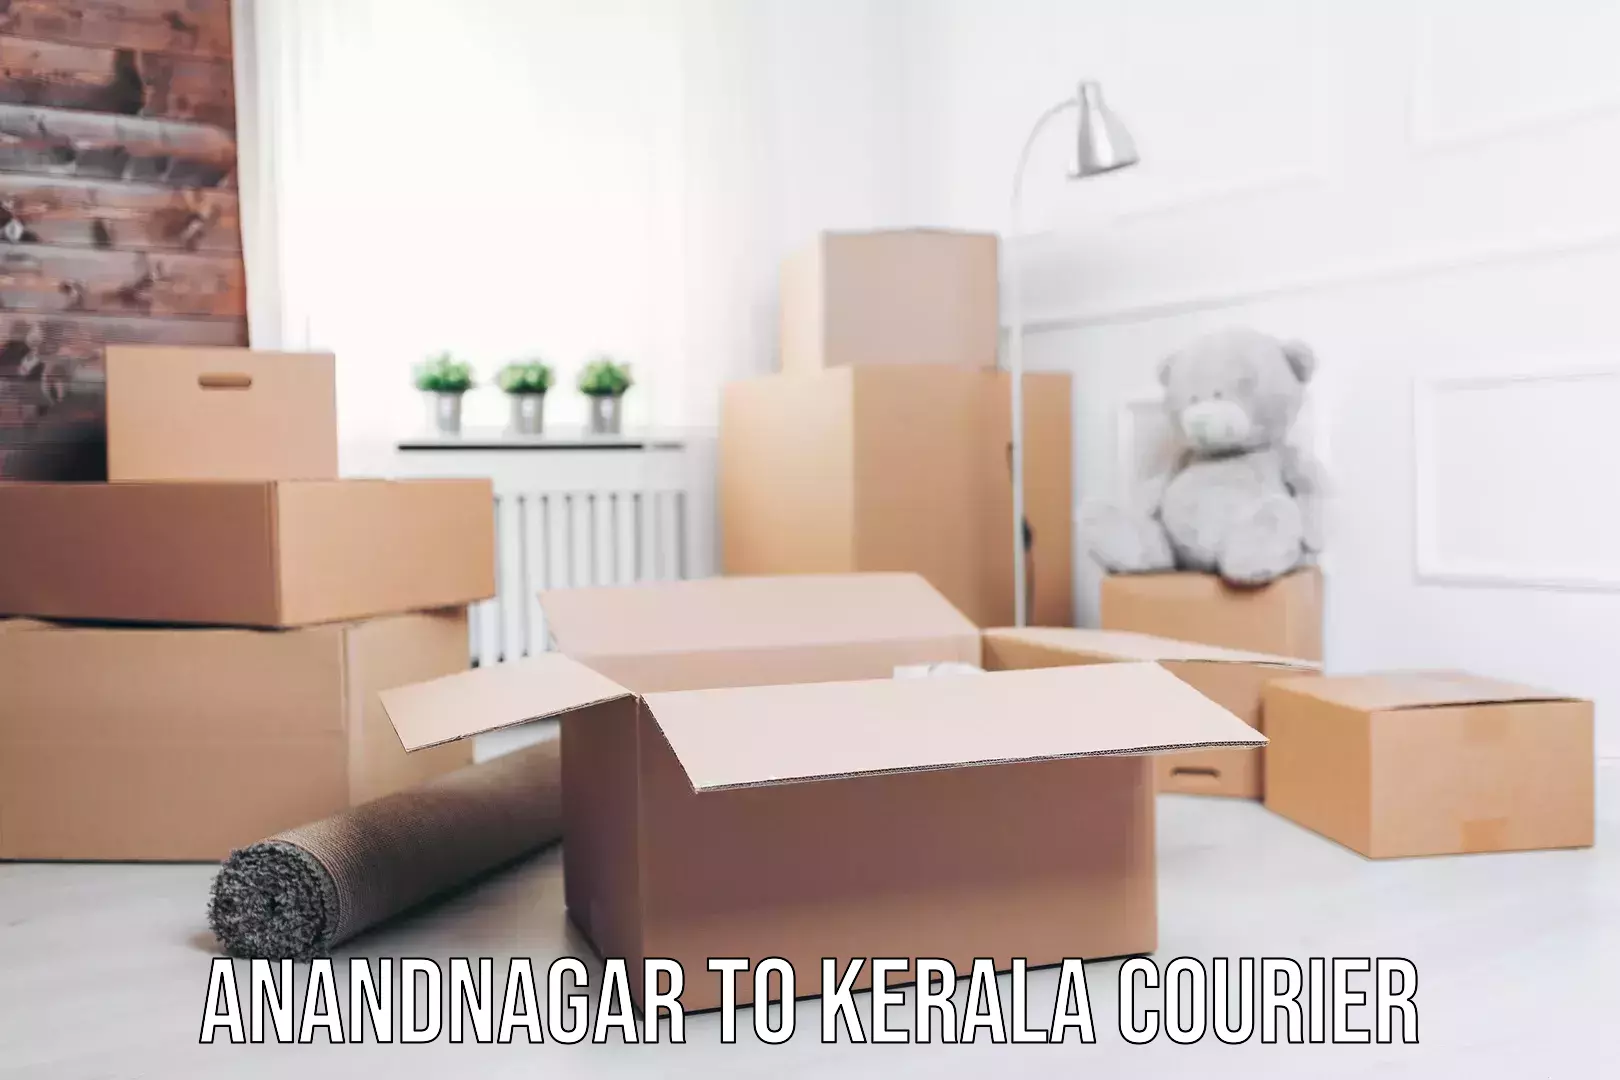 Reliable courier service Anandnagar to Kerala